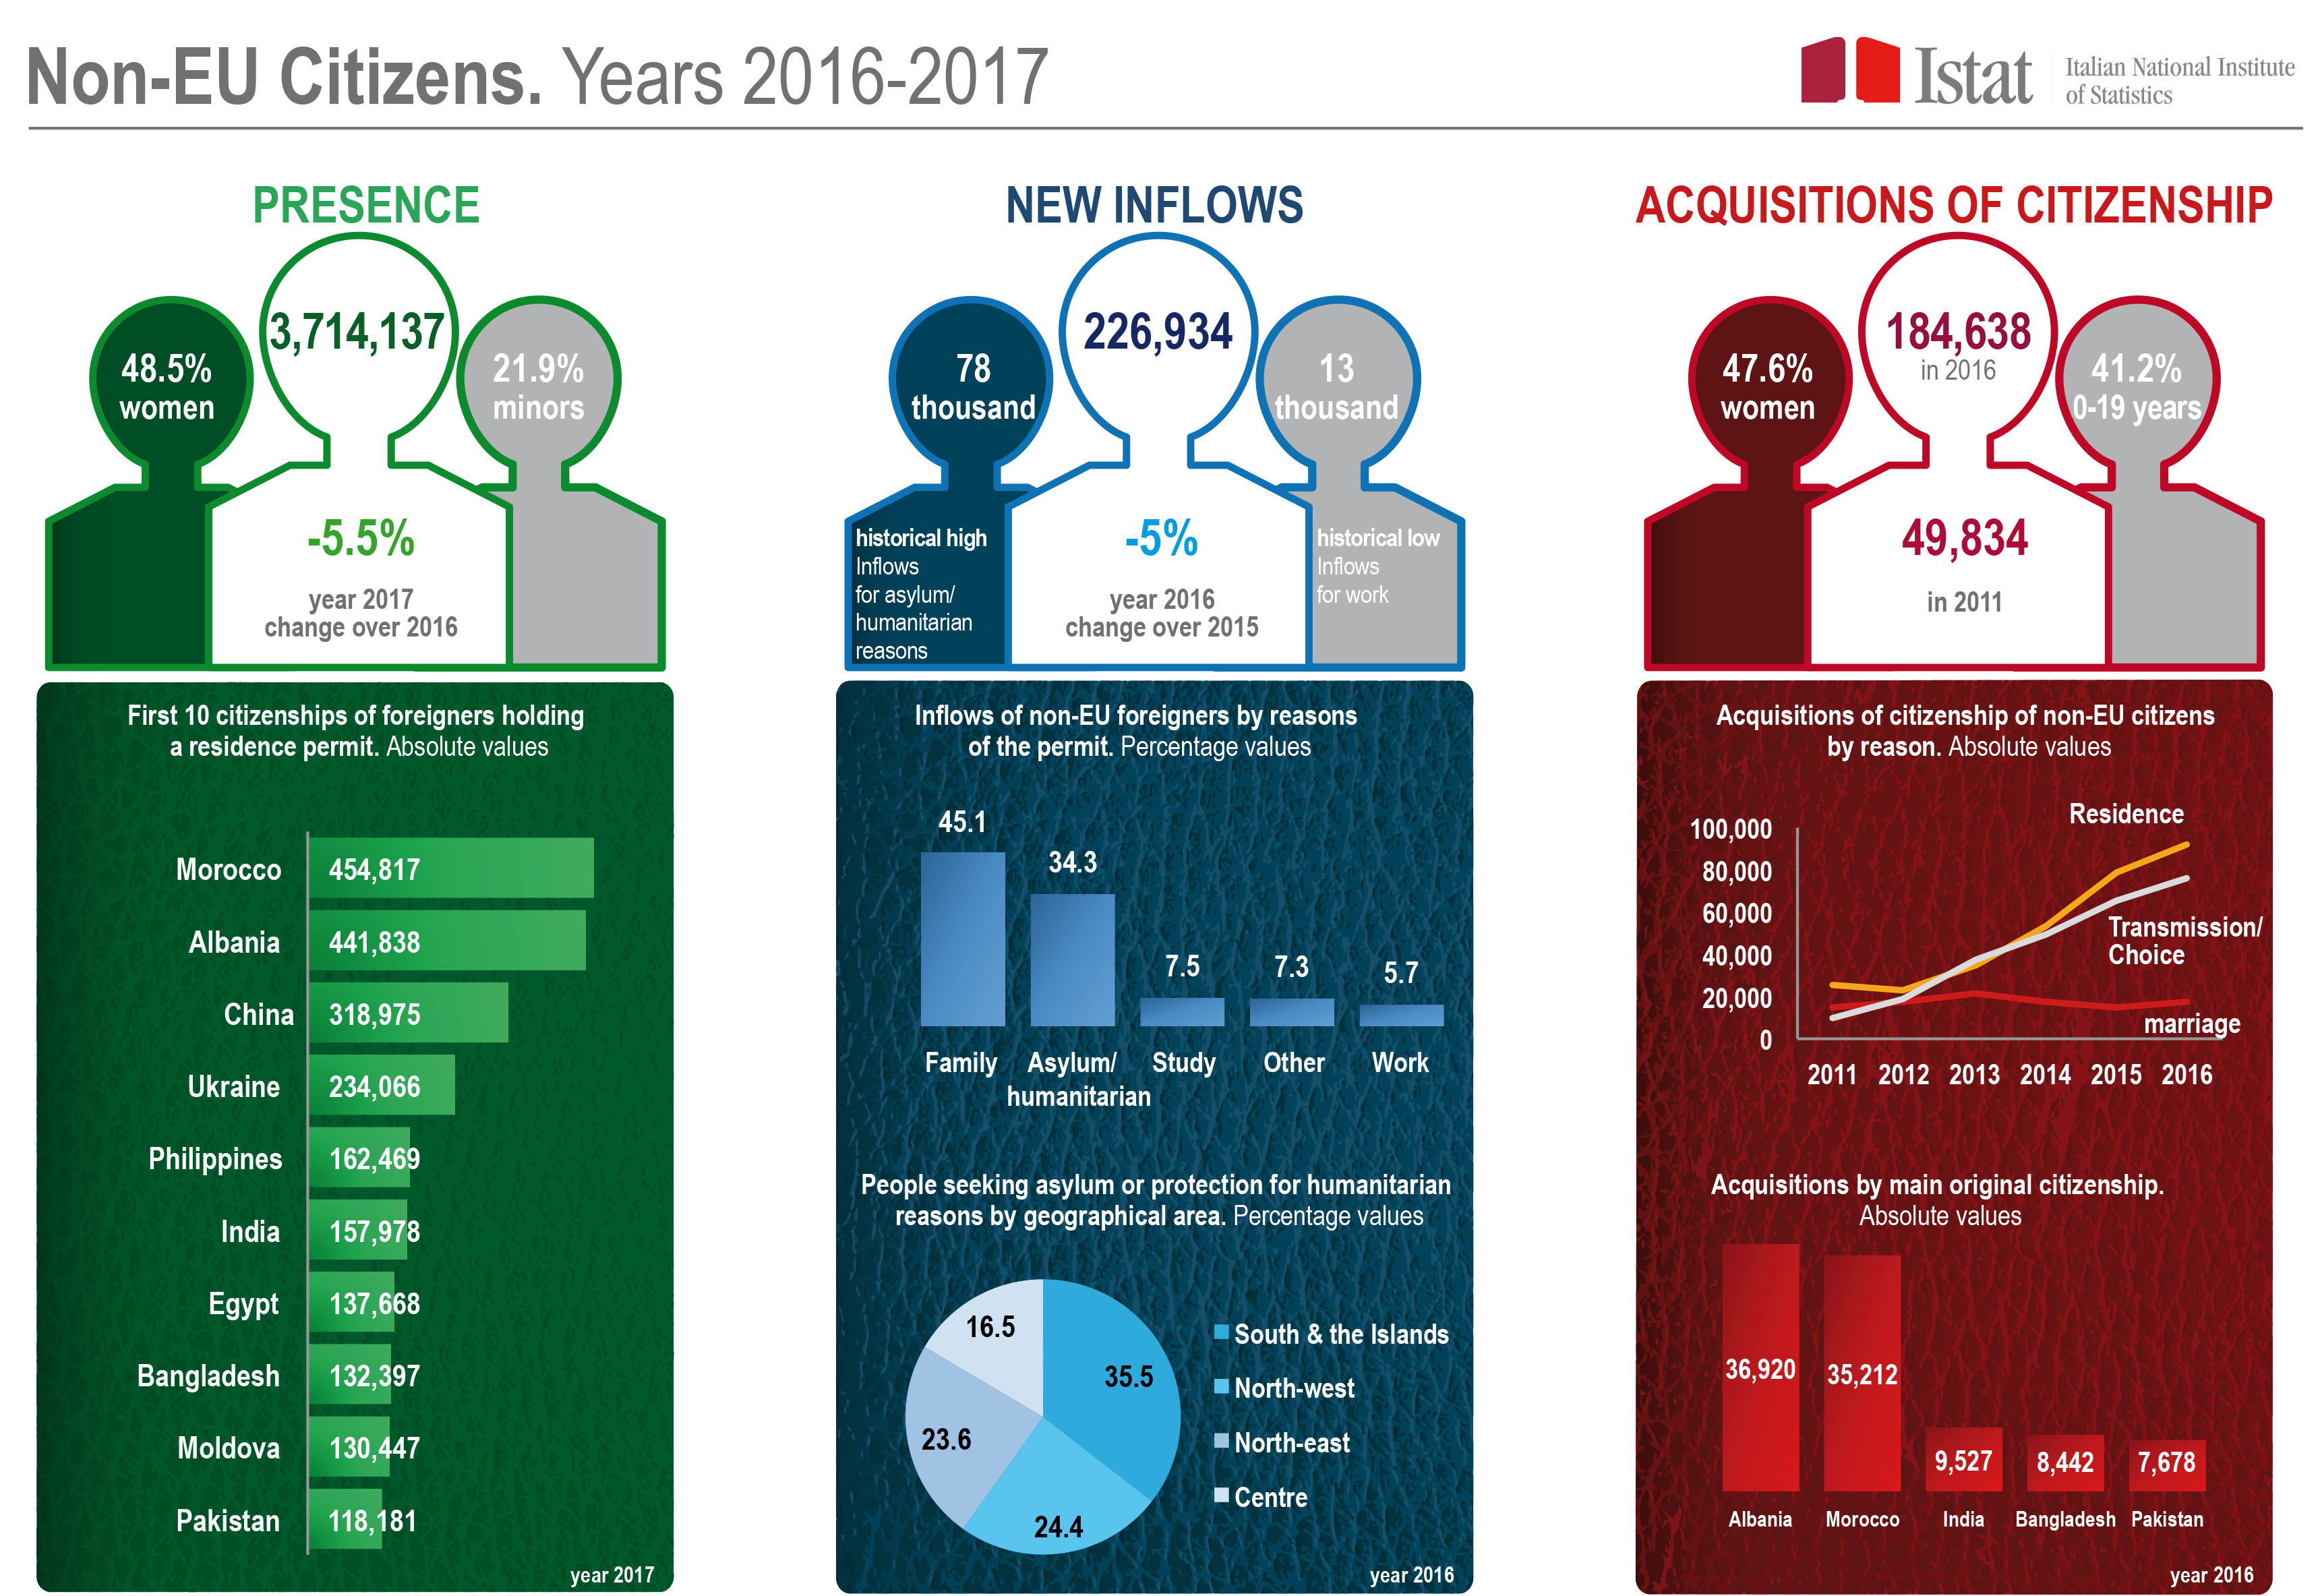 Infographics on Non-EU citizens in Italy. Years 2016-2017